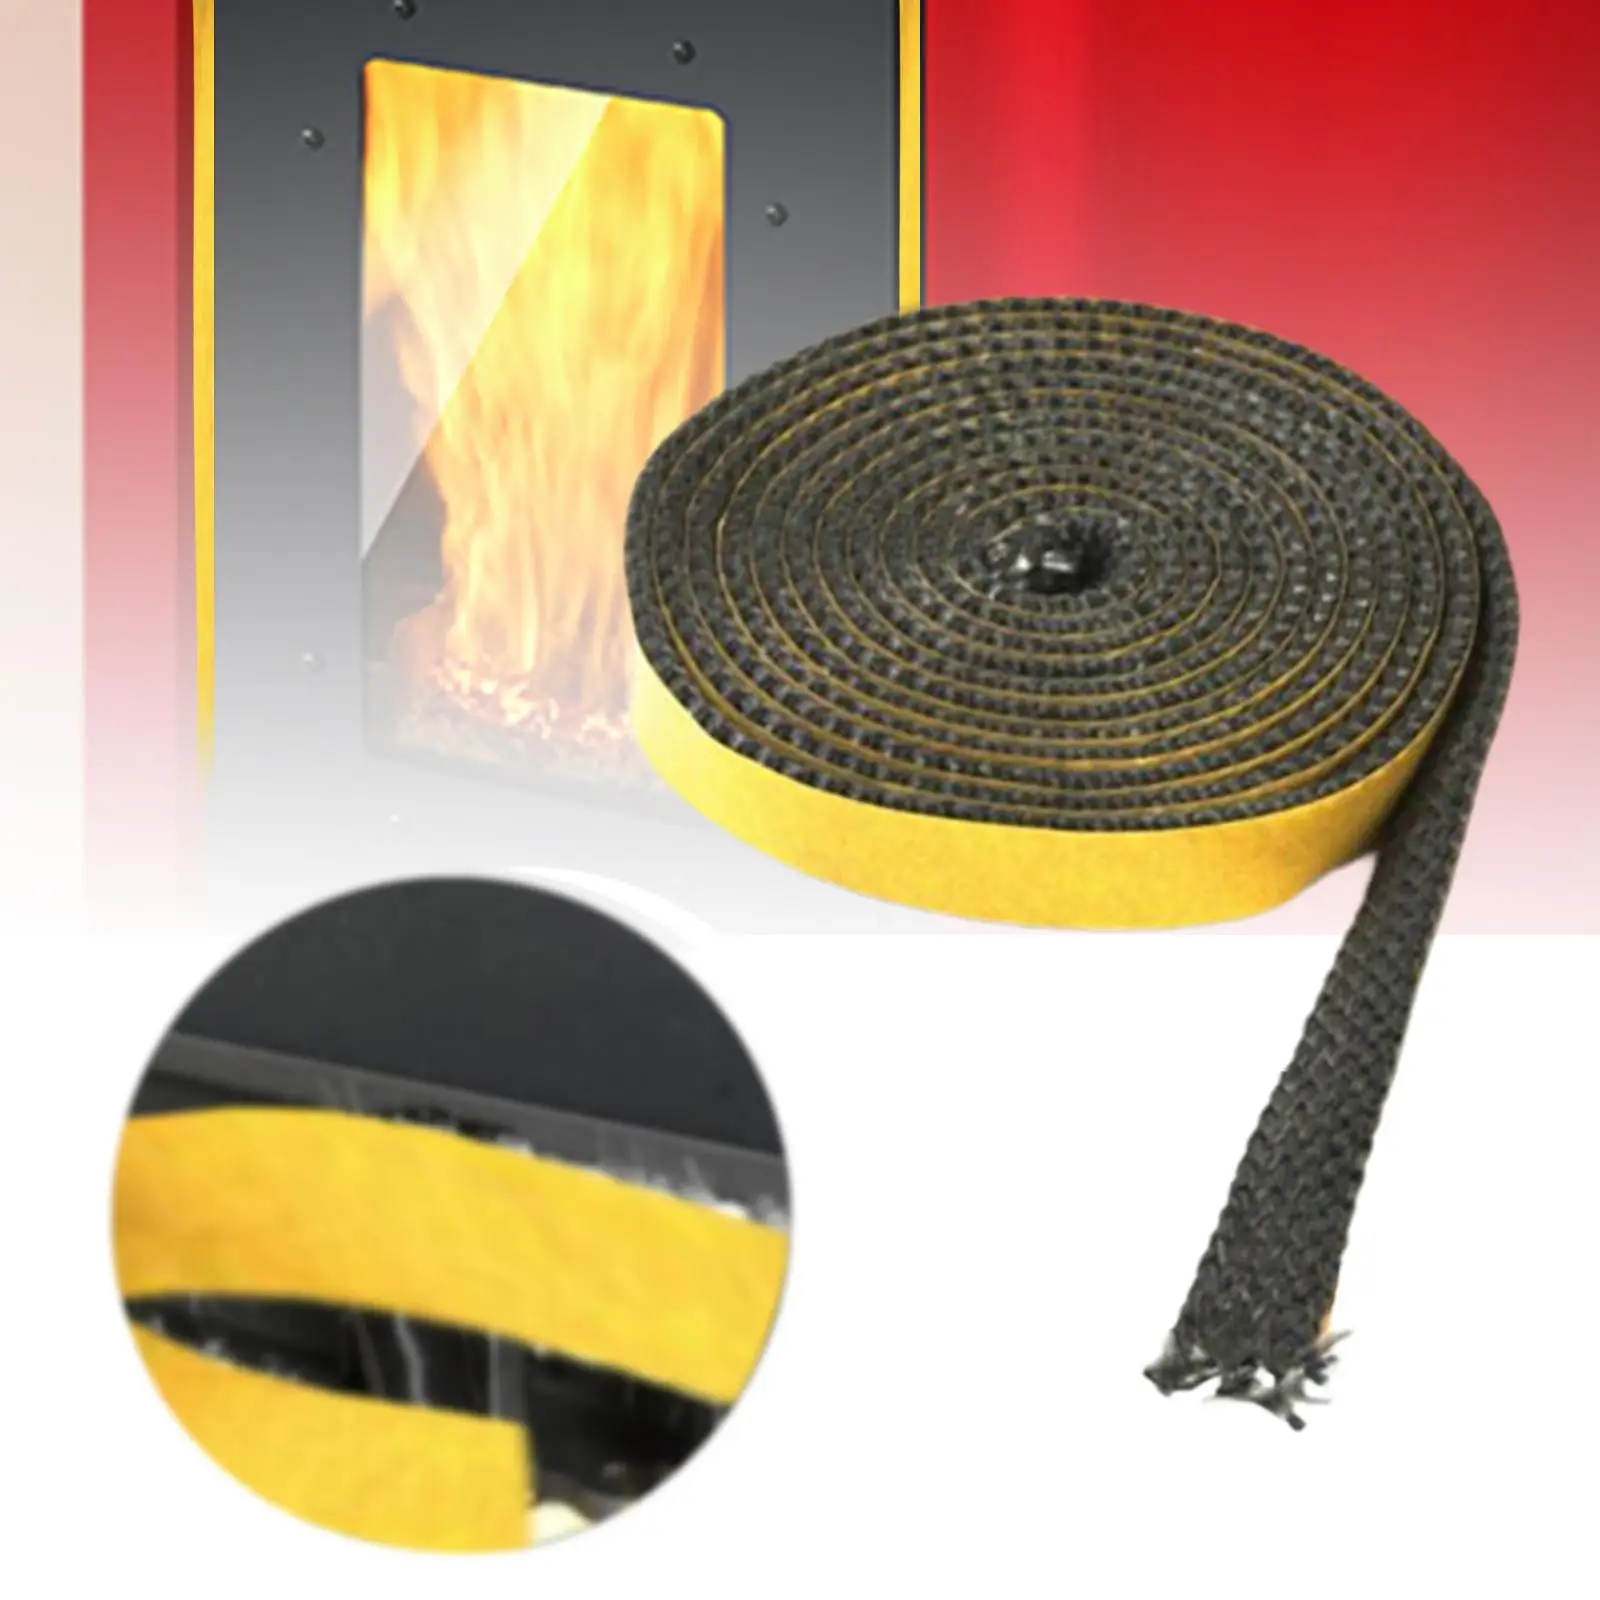 18mmx3Metre Fireplace Tape Seal Self Adhesive Accessories Wear Resistant